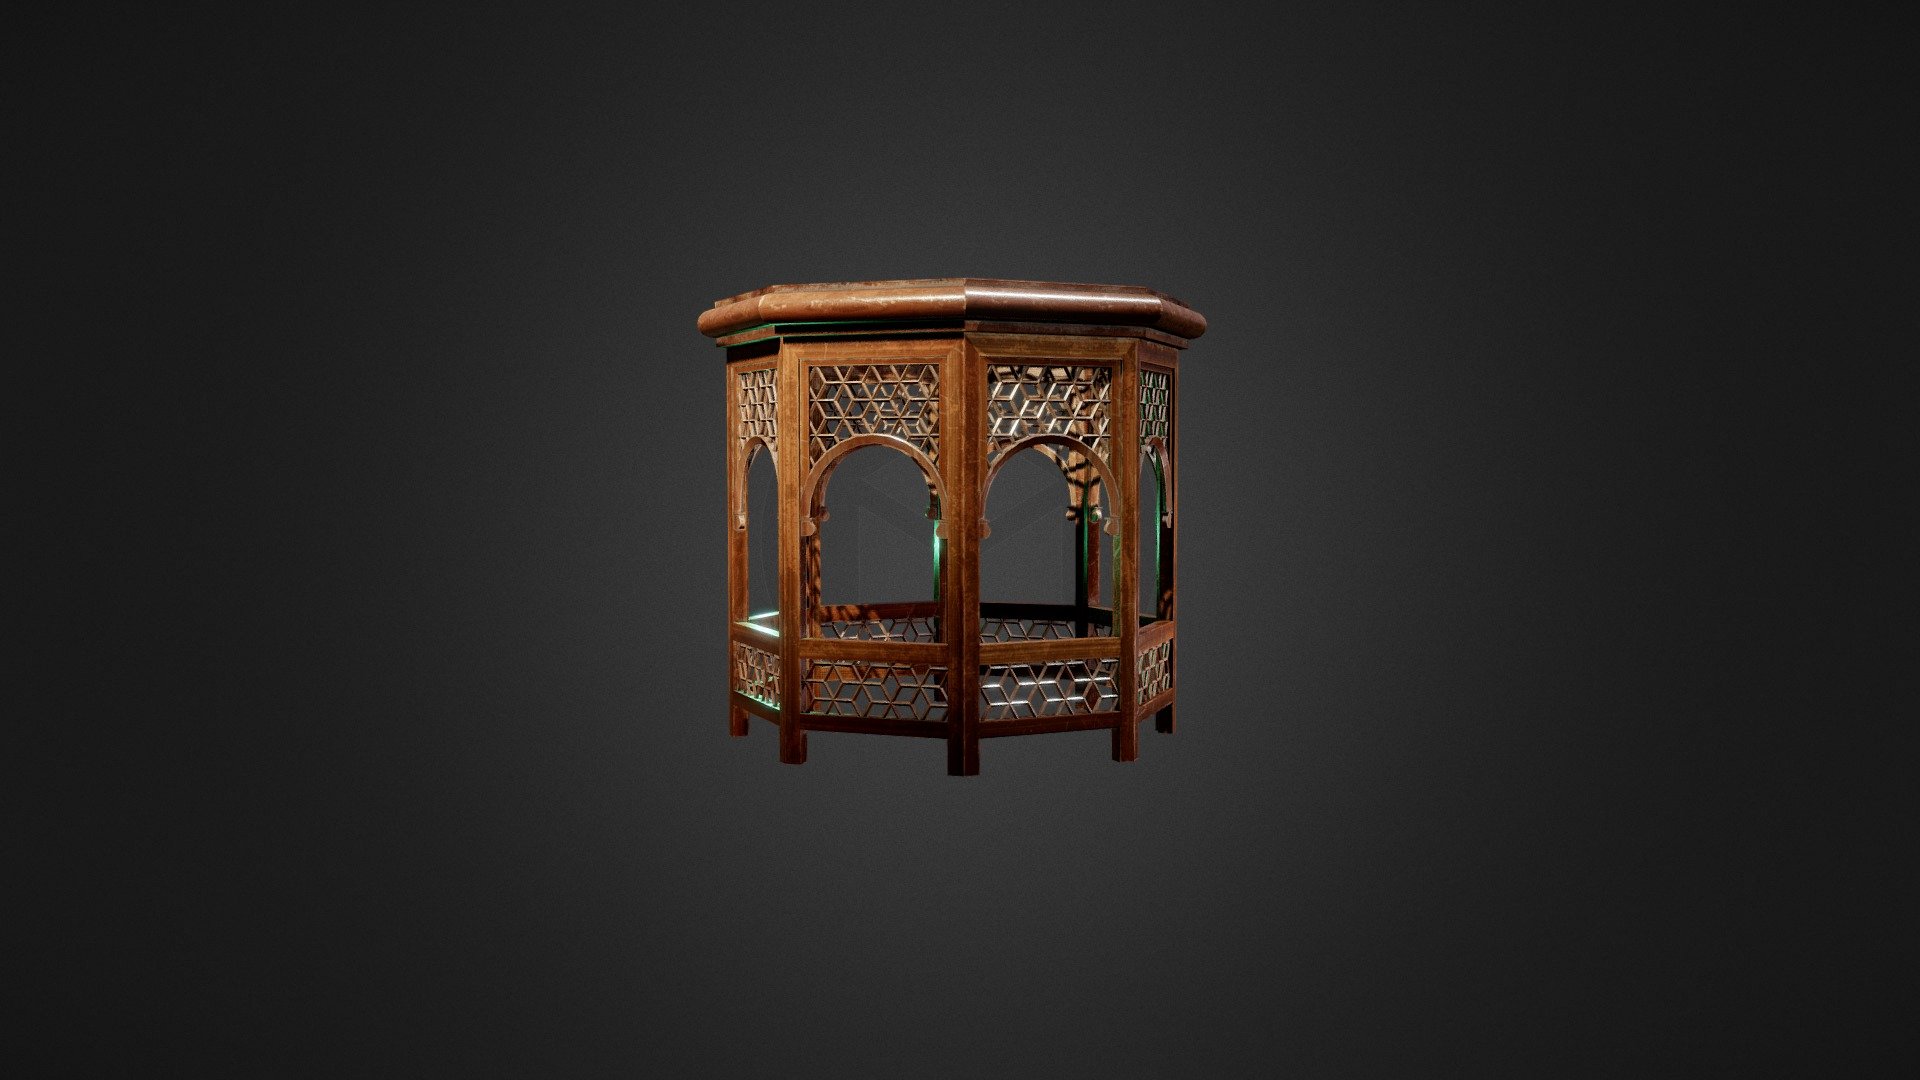 This play is part of a larger scenario that is in production.
Software:
 Blender, modeling
 Substançe Painter, Texture - Arab furniture - 3D model by gabriel_do_Prado 3d model